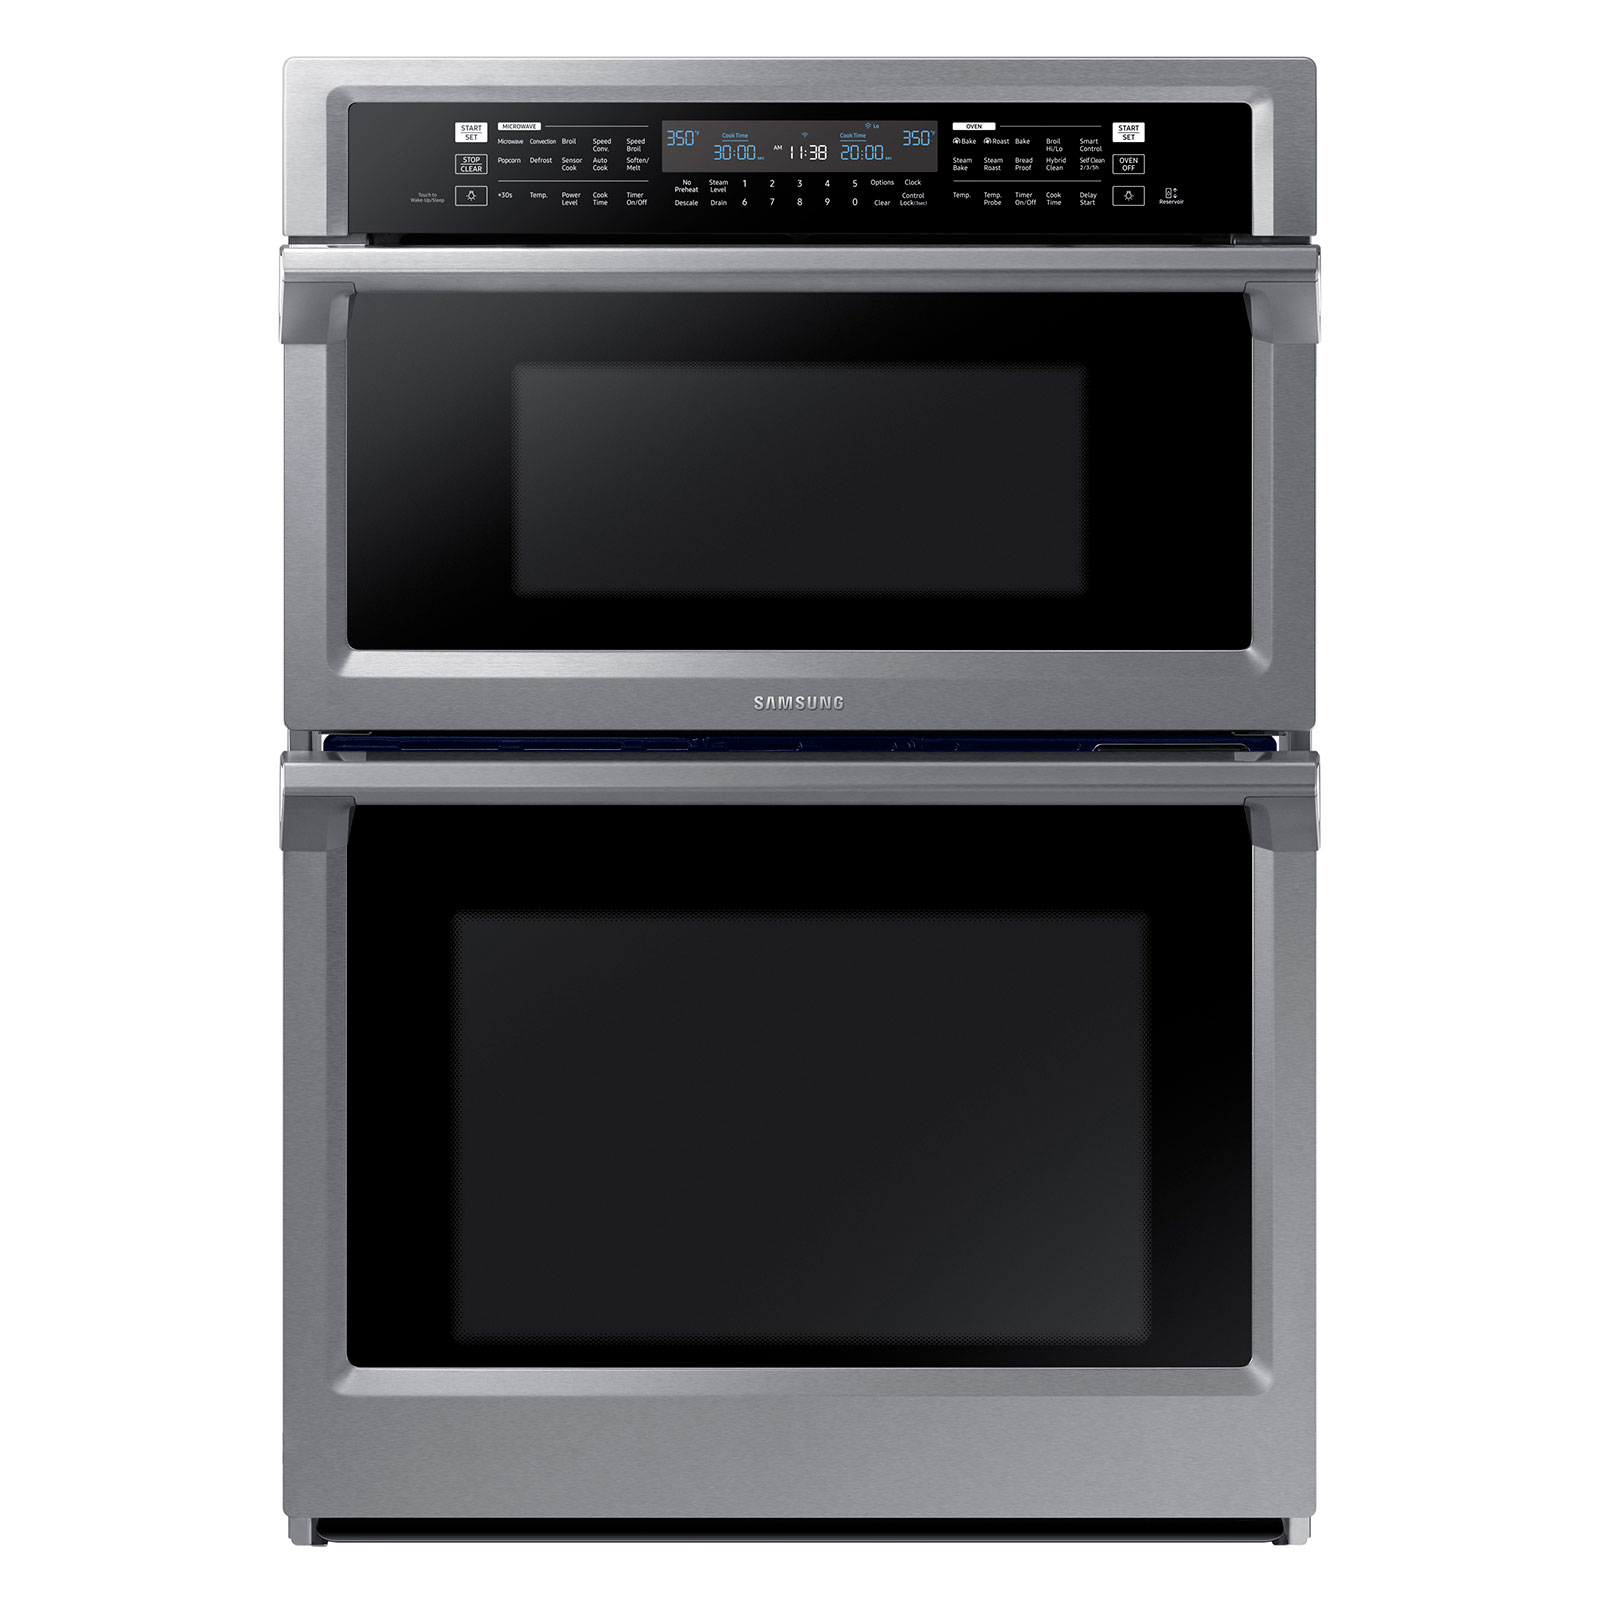 Samsung Samsung NQ70M6650DS/AA 30” Microwave Combination Wall Oven - Stainless Steel